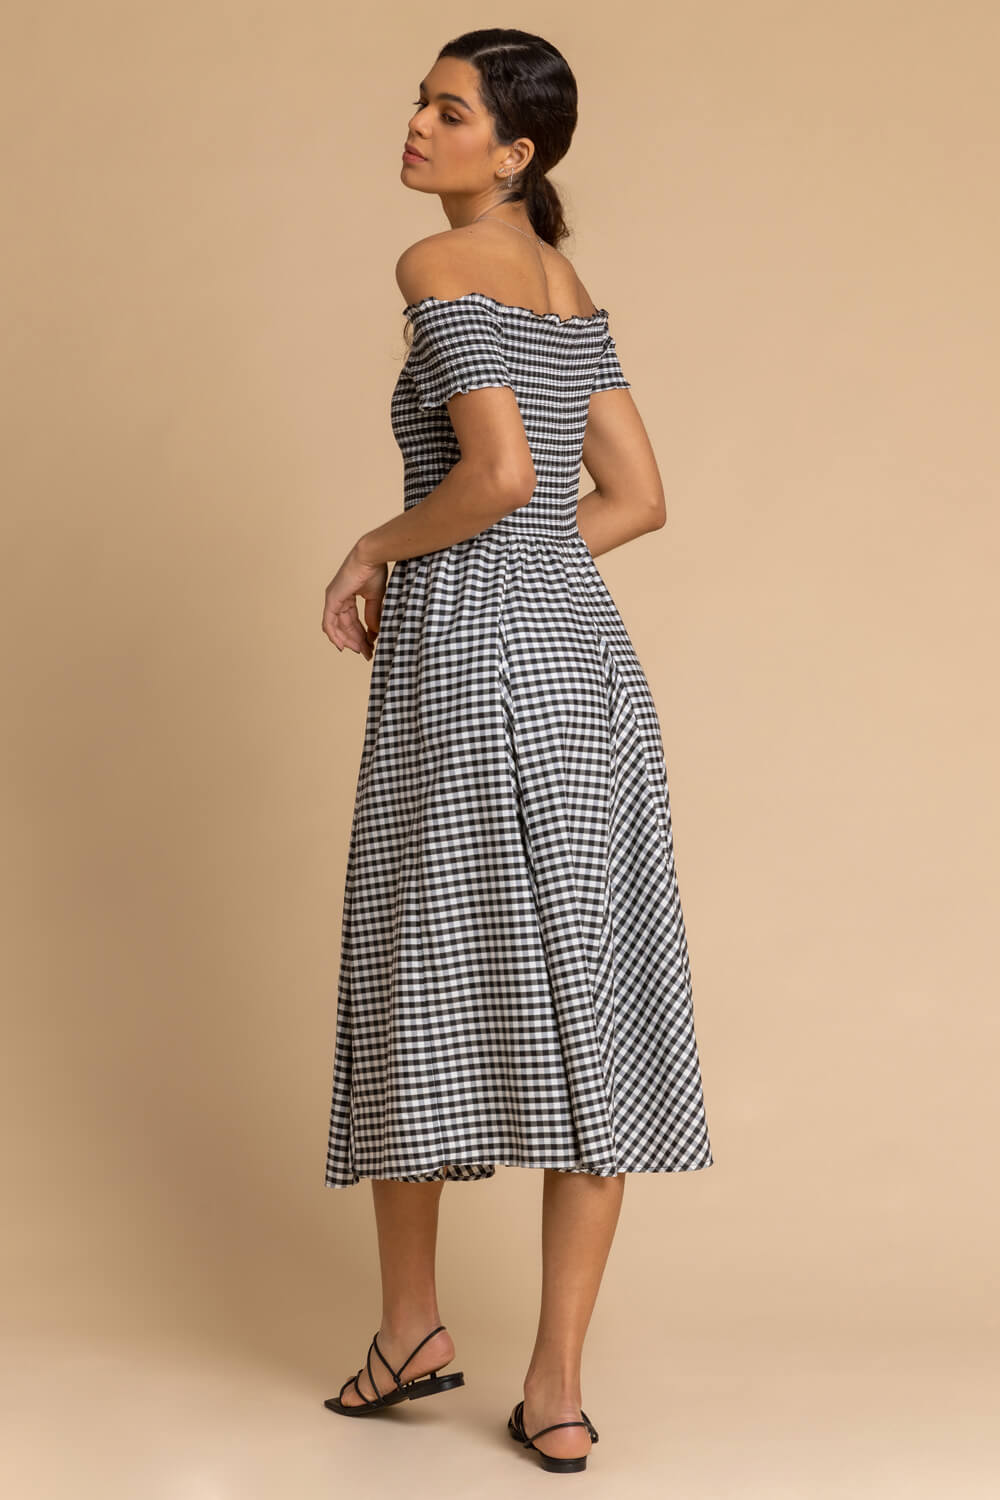 Black Gingham Bardot Fit and Flare Dress, Image 2 of 5